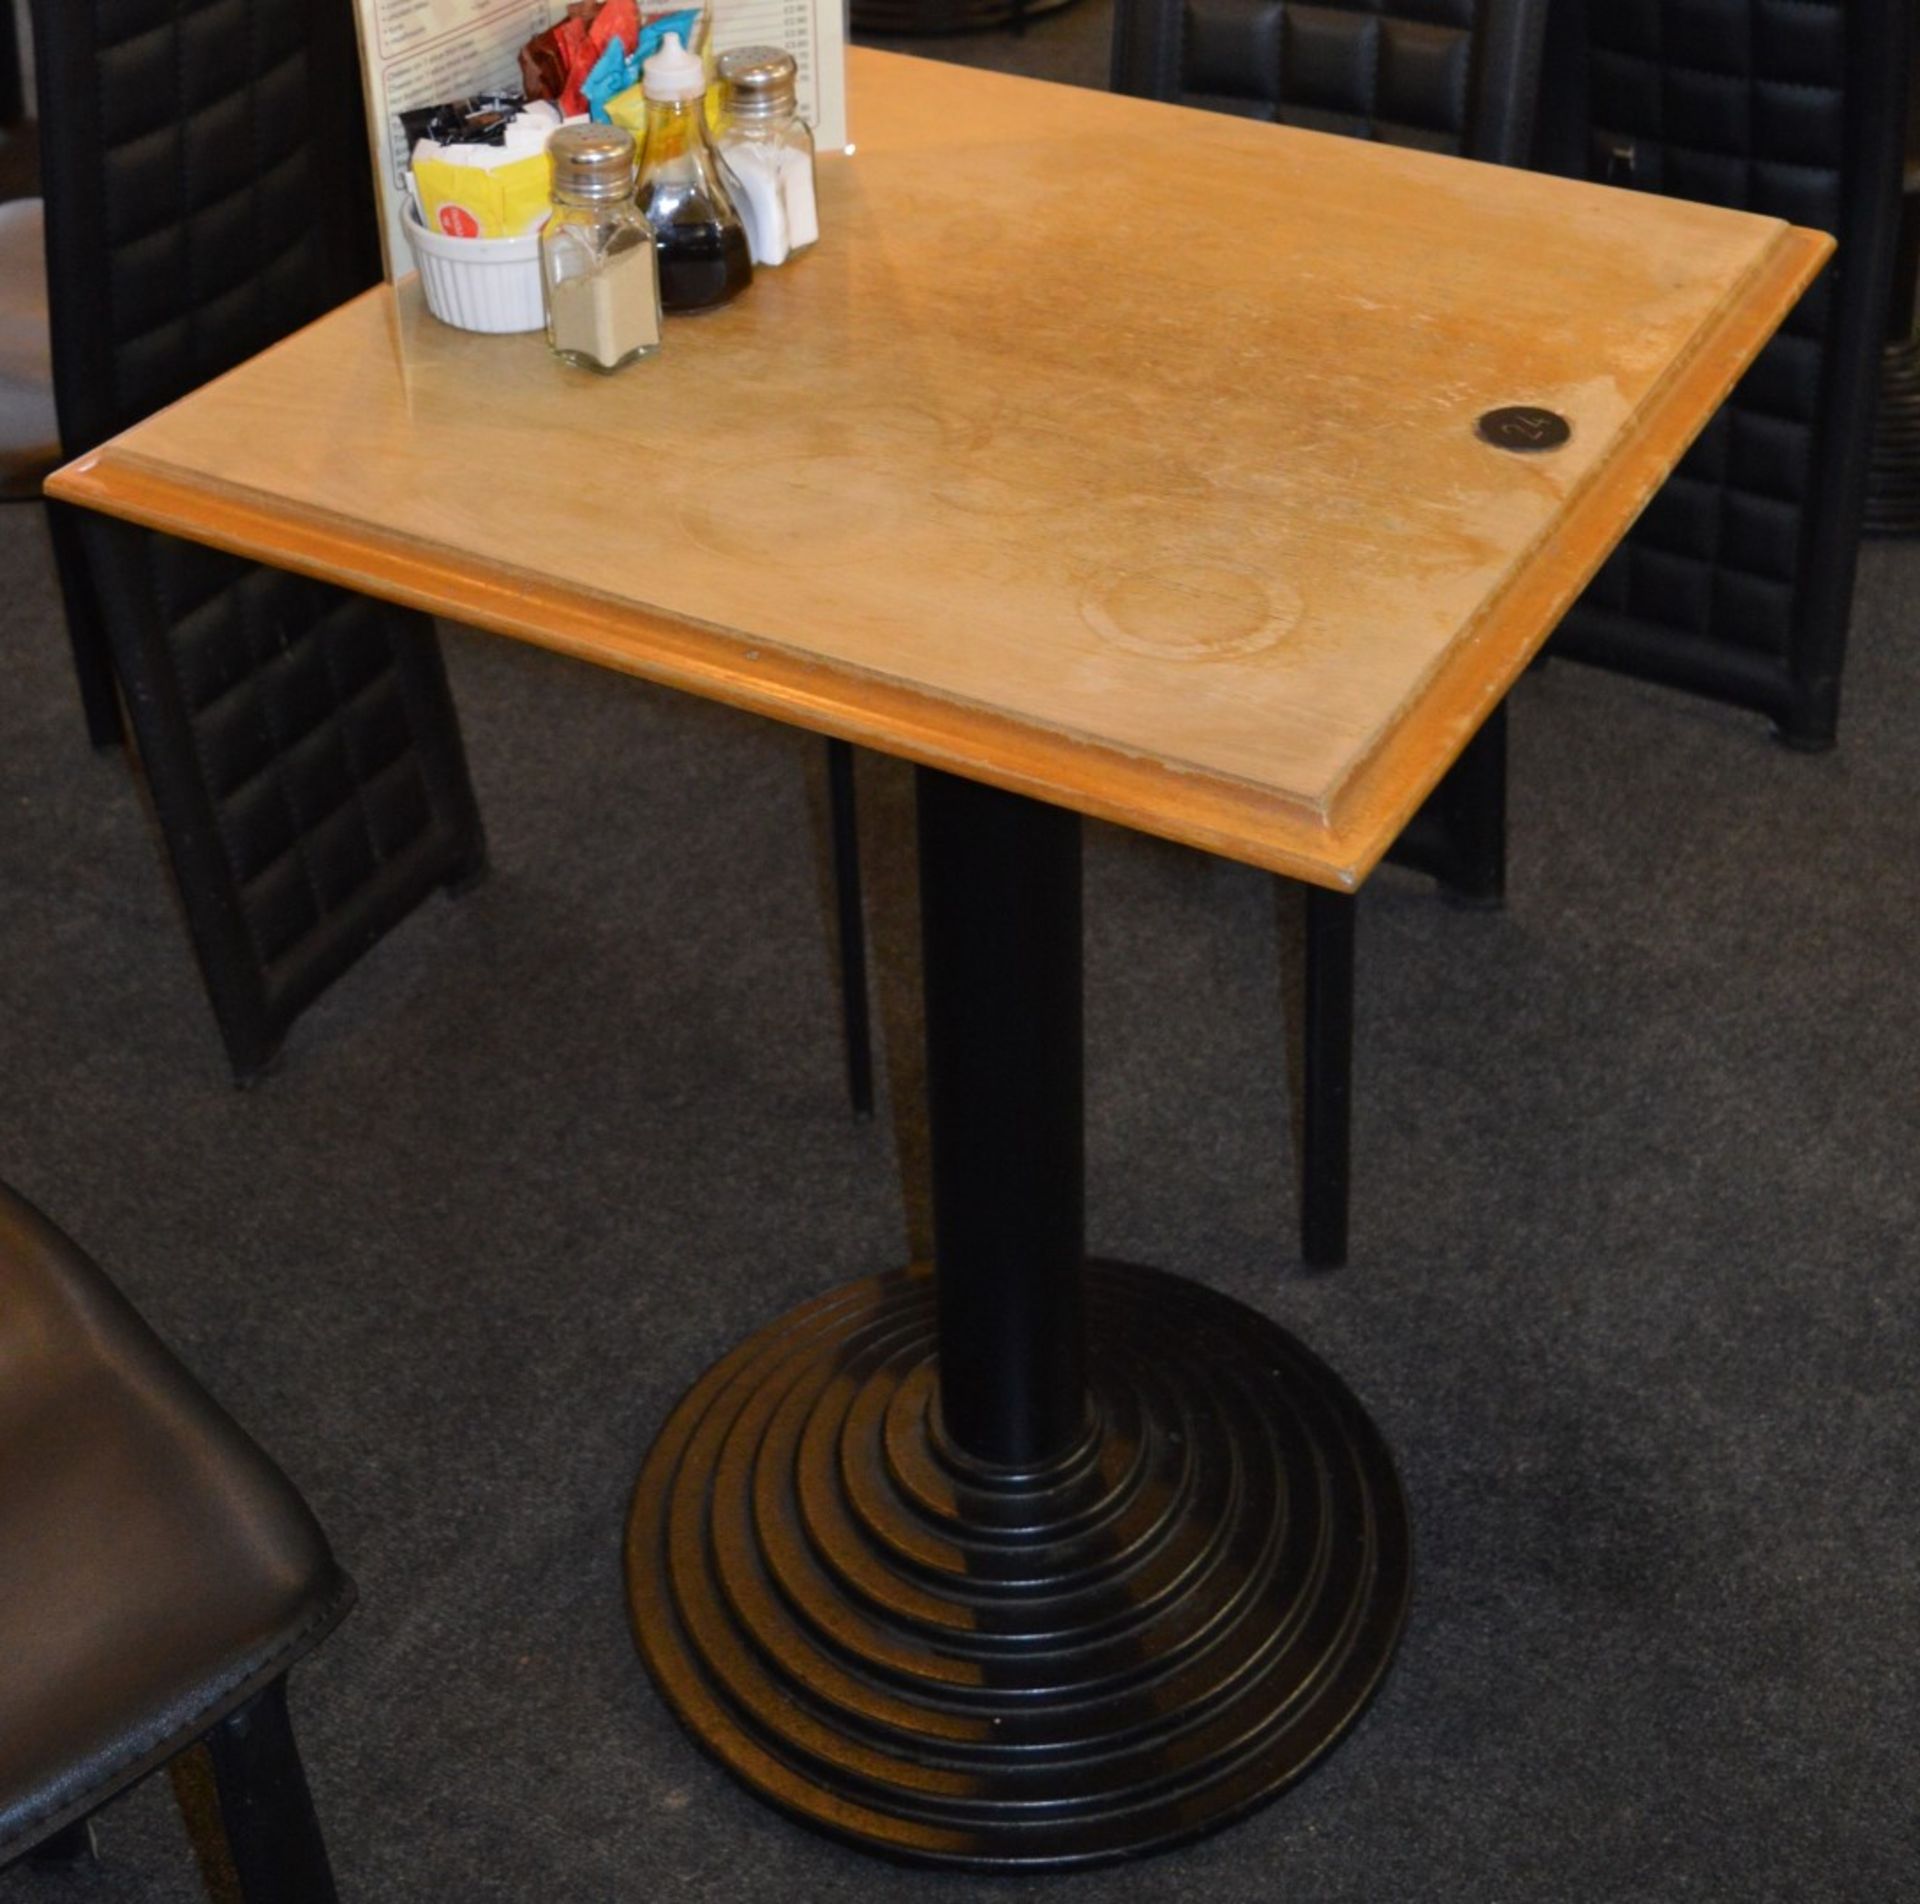 6 x Bistro Tables - Substantial Bases With Light Wooden Tops - Ideal For Coffee Shops, Cafes,